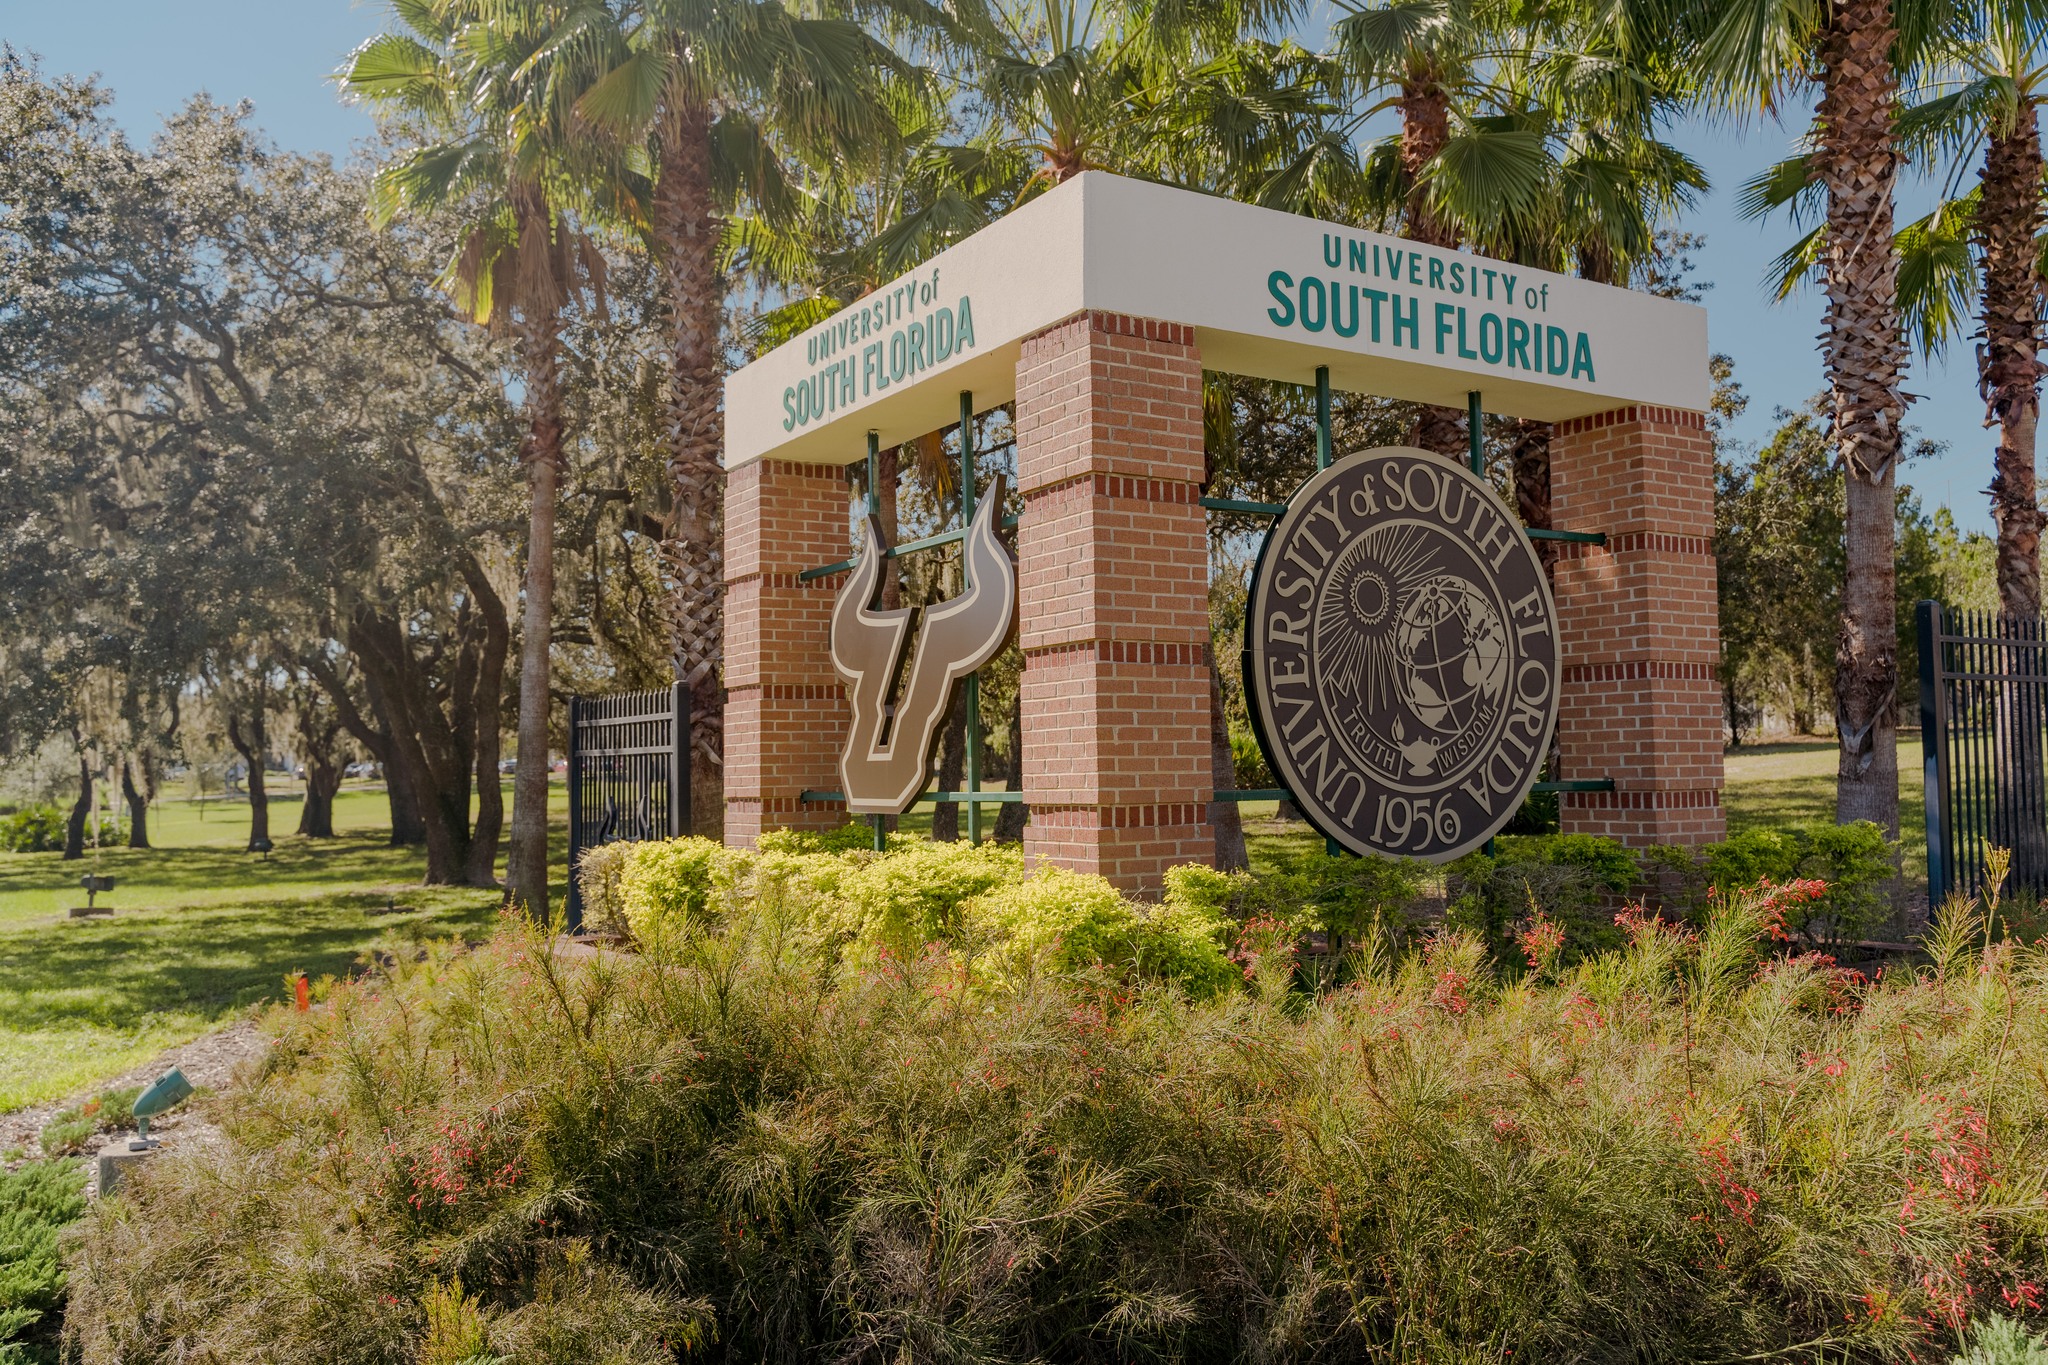 Image of University of South Florida gate showing the school's seal.